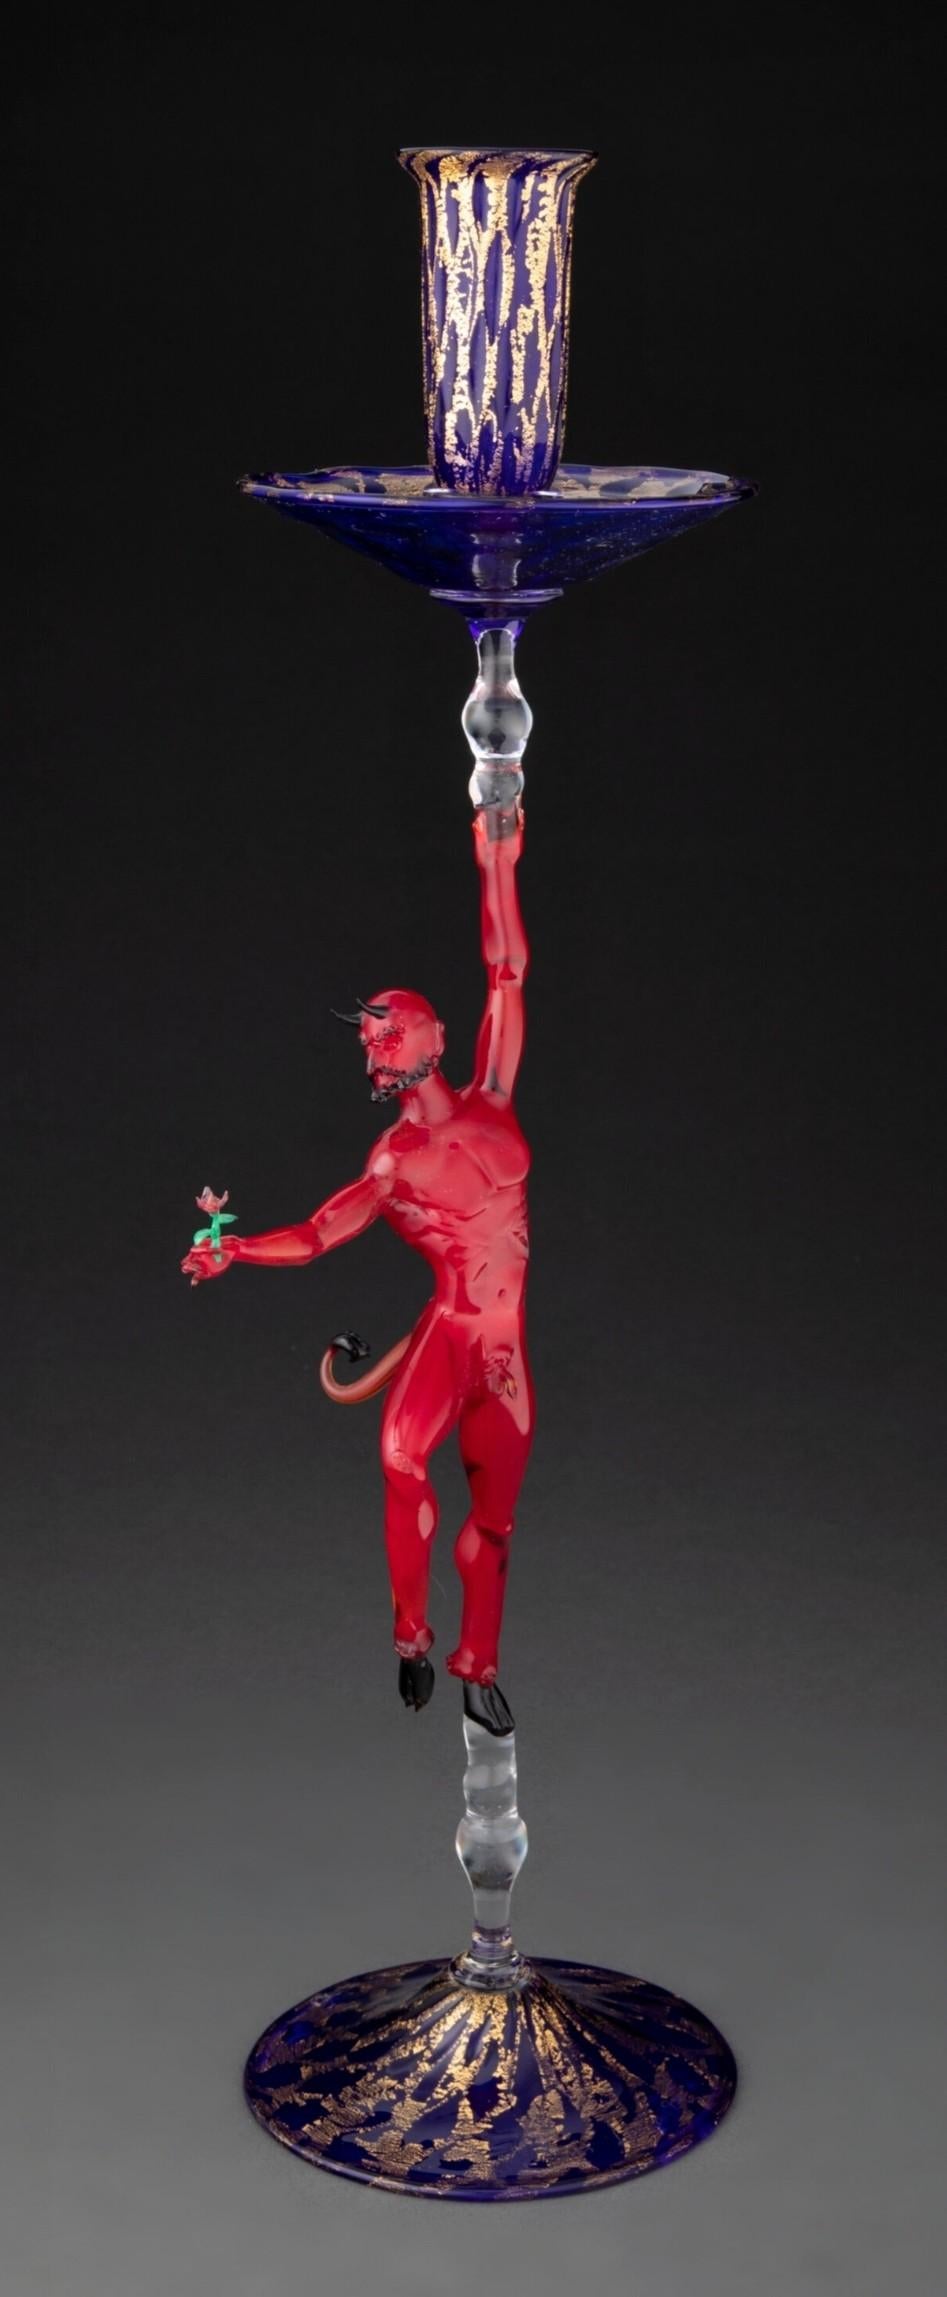 A rare and exceptionally executed signed Lucio Bubacco (Italian, b. 1957) hand-blown Venetian art glass 'Red Devil with Rose' Candlestick, dated 1994.

The visually striking sculptural candlestick of cobalt glass with gilt foil inclusions,